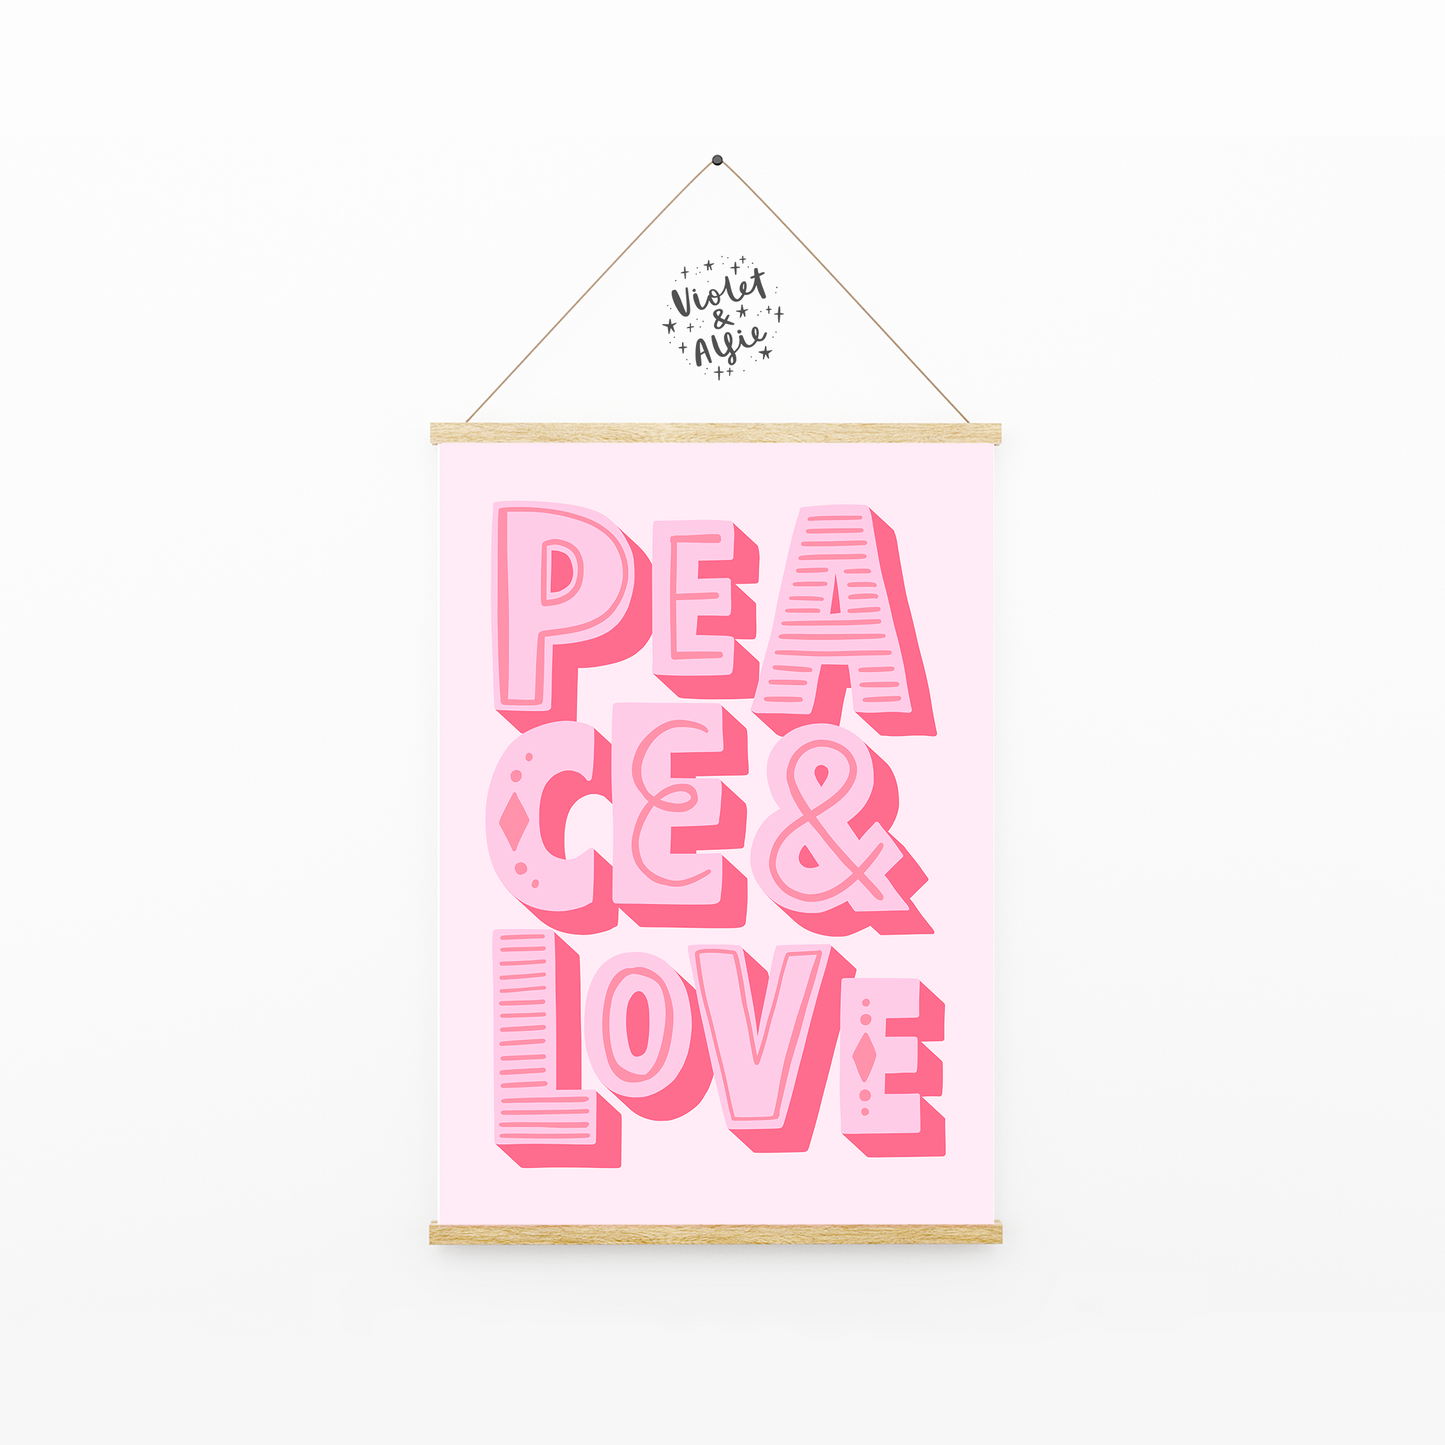 Peace and love print, typographic wall art, bright bold gallery wall prints, peace print, love print, bright pink decor, eclectic home wall decor, vibrant colourful home decor